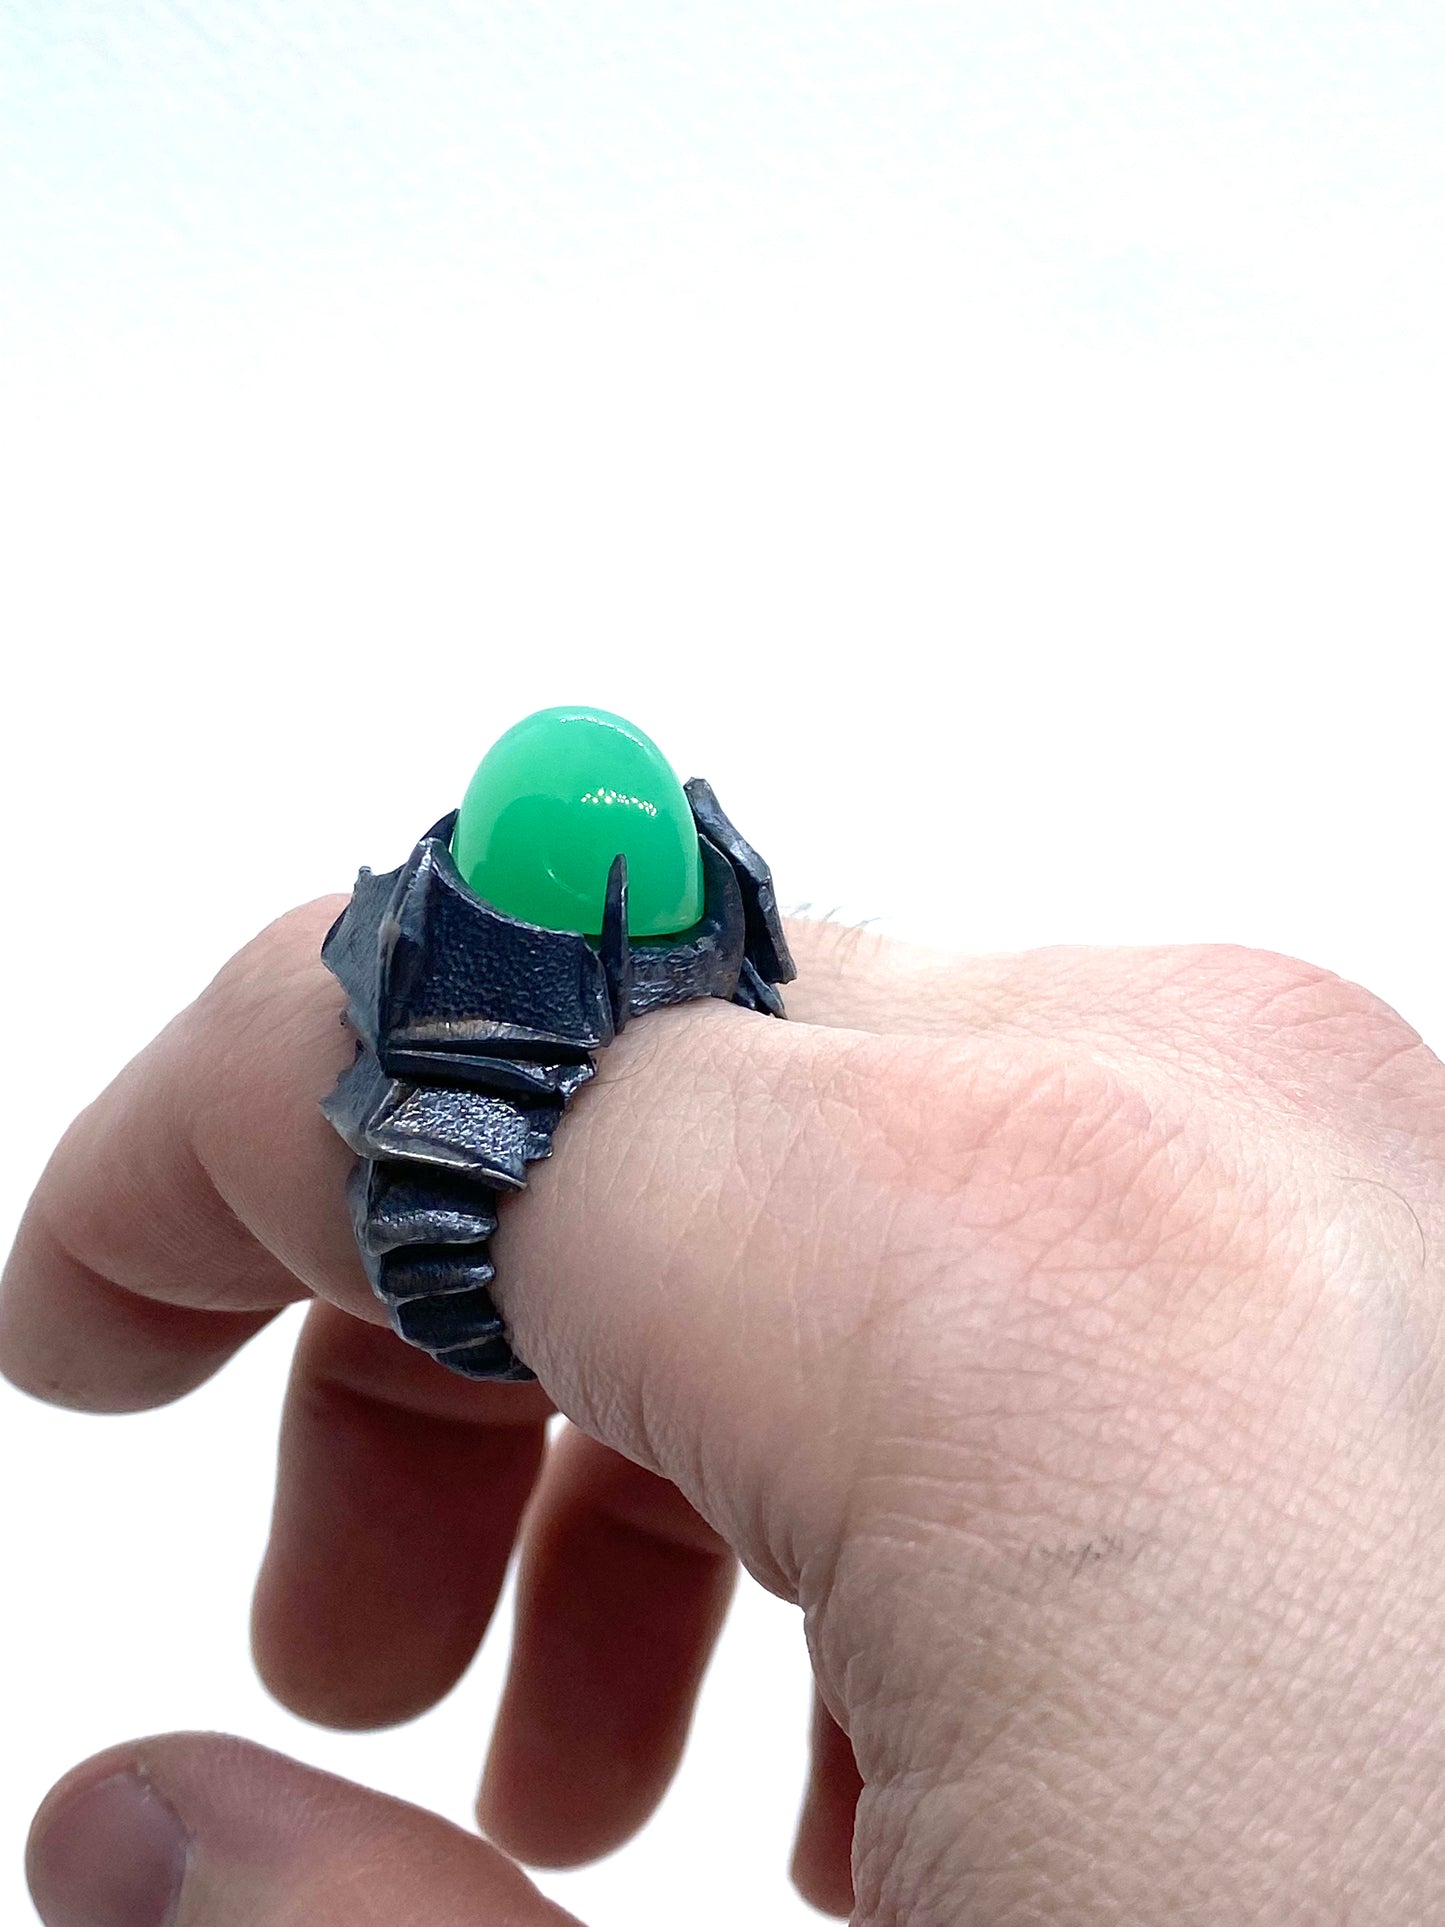 Black Knight’s Ring with Chrysoprase in Sterling Silver